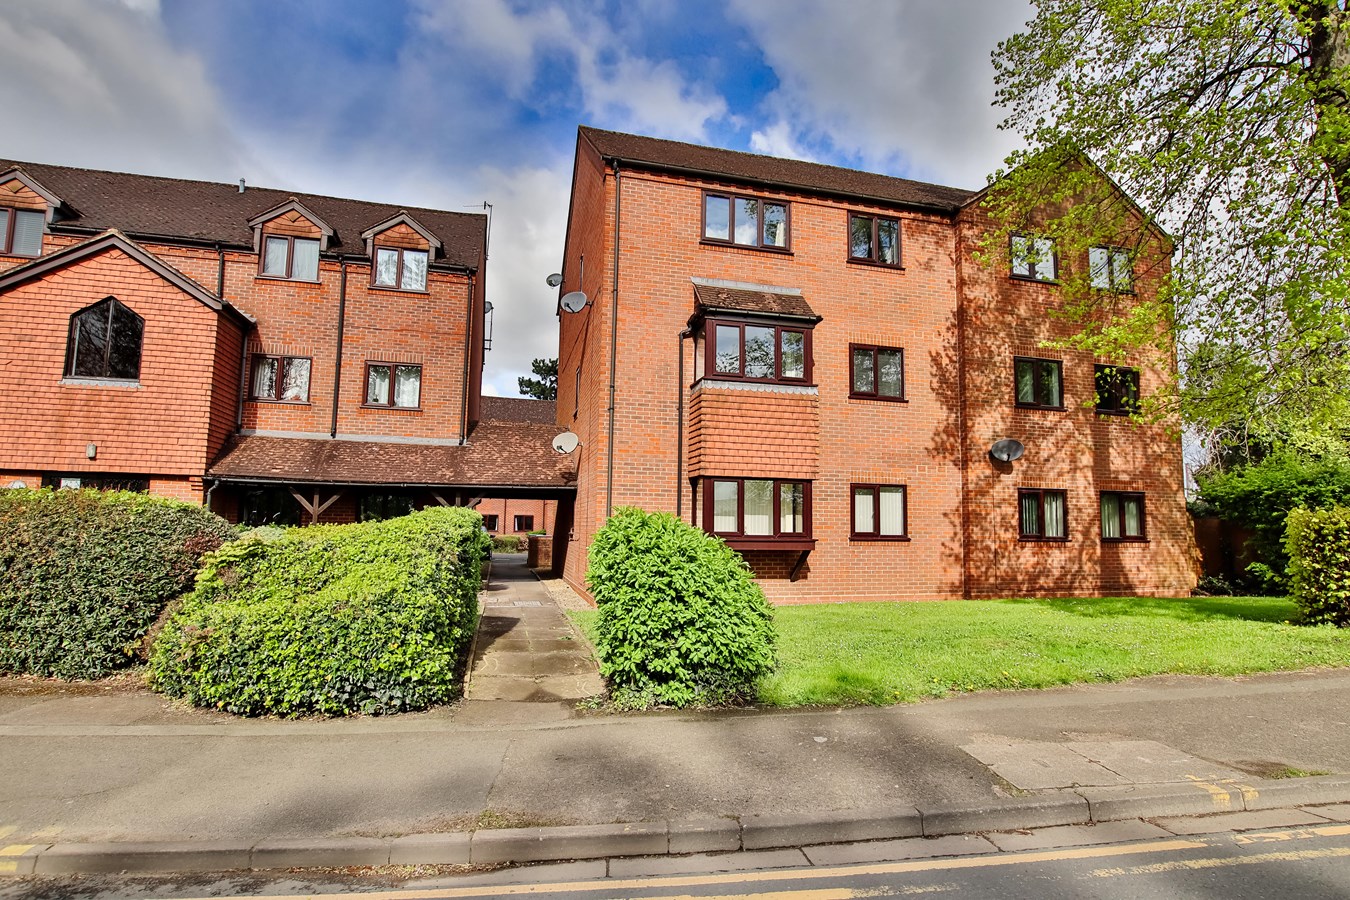 Checketts Court, Droitwich Road, Claines, WR3